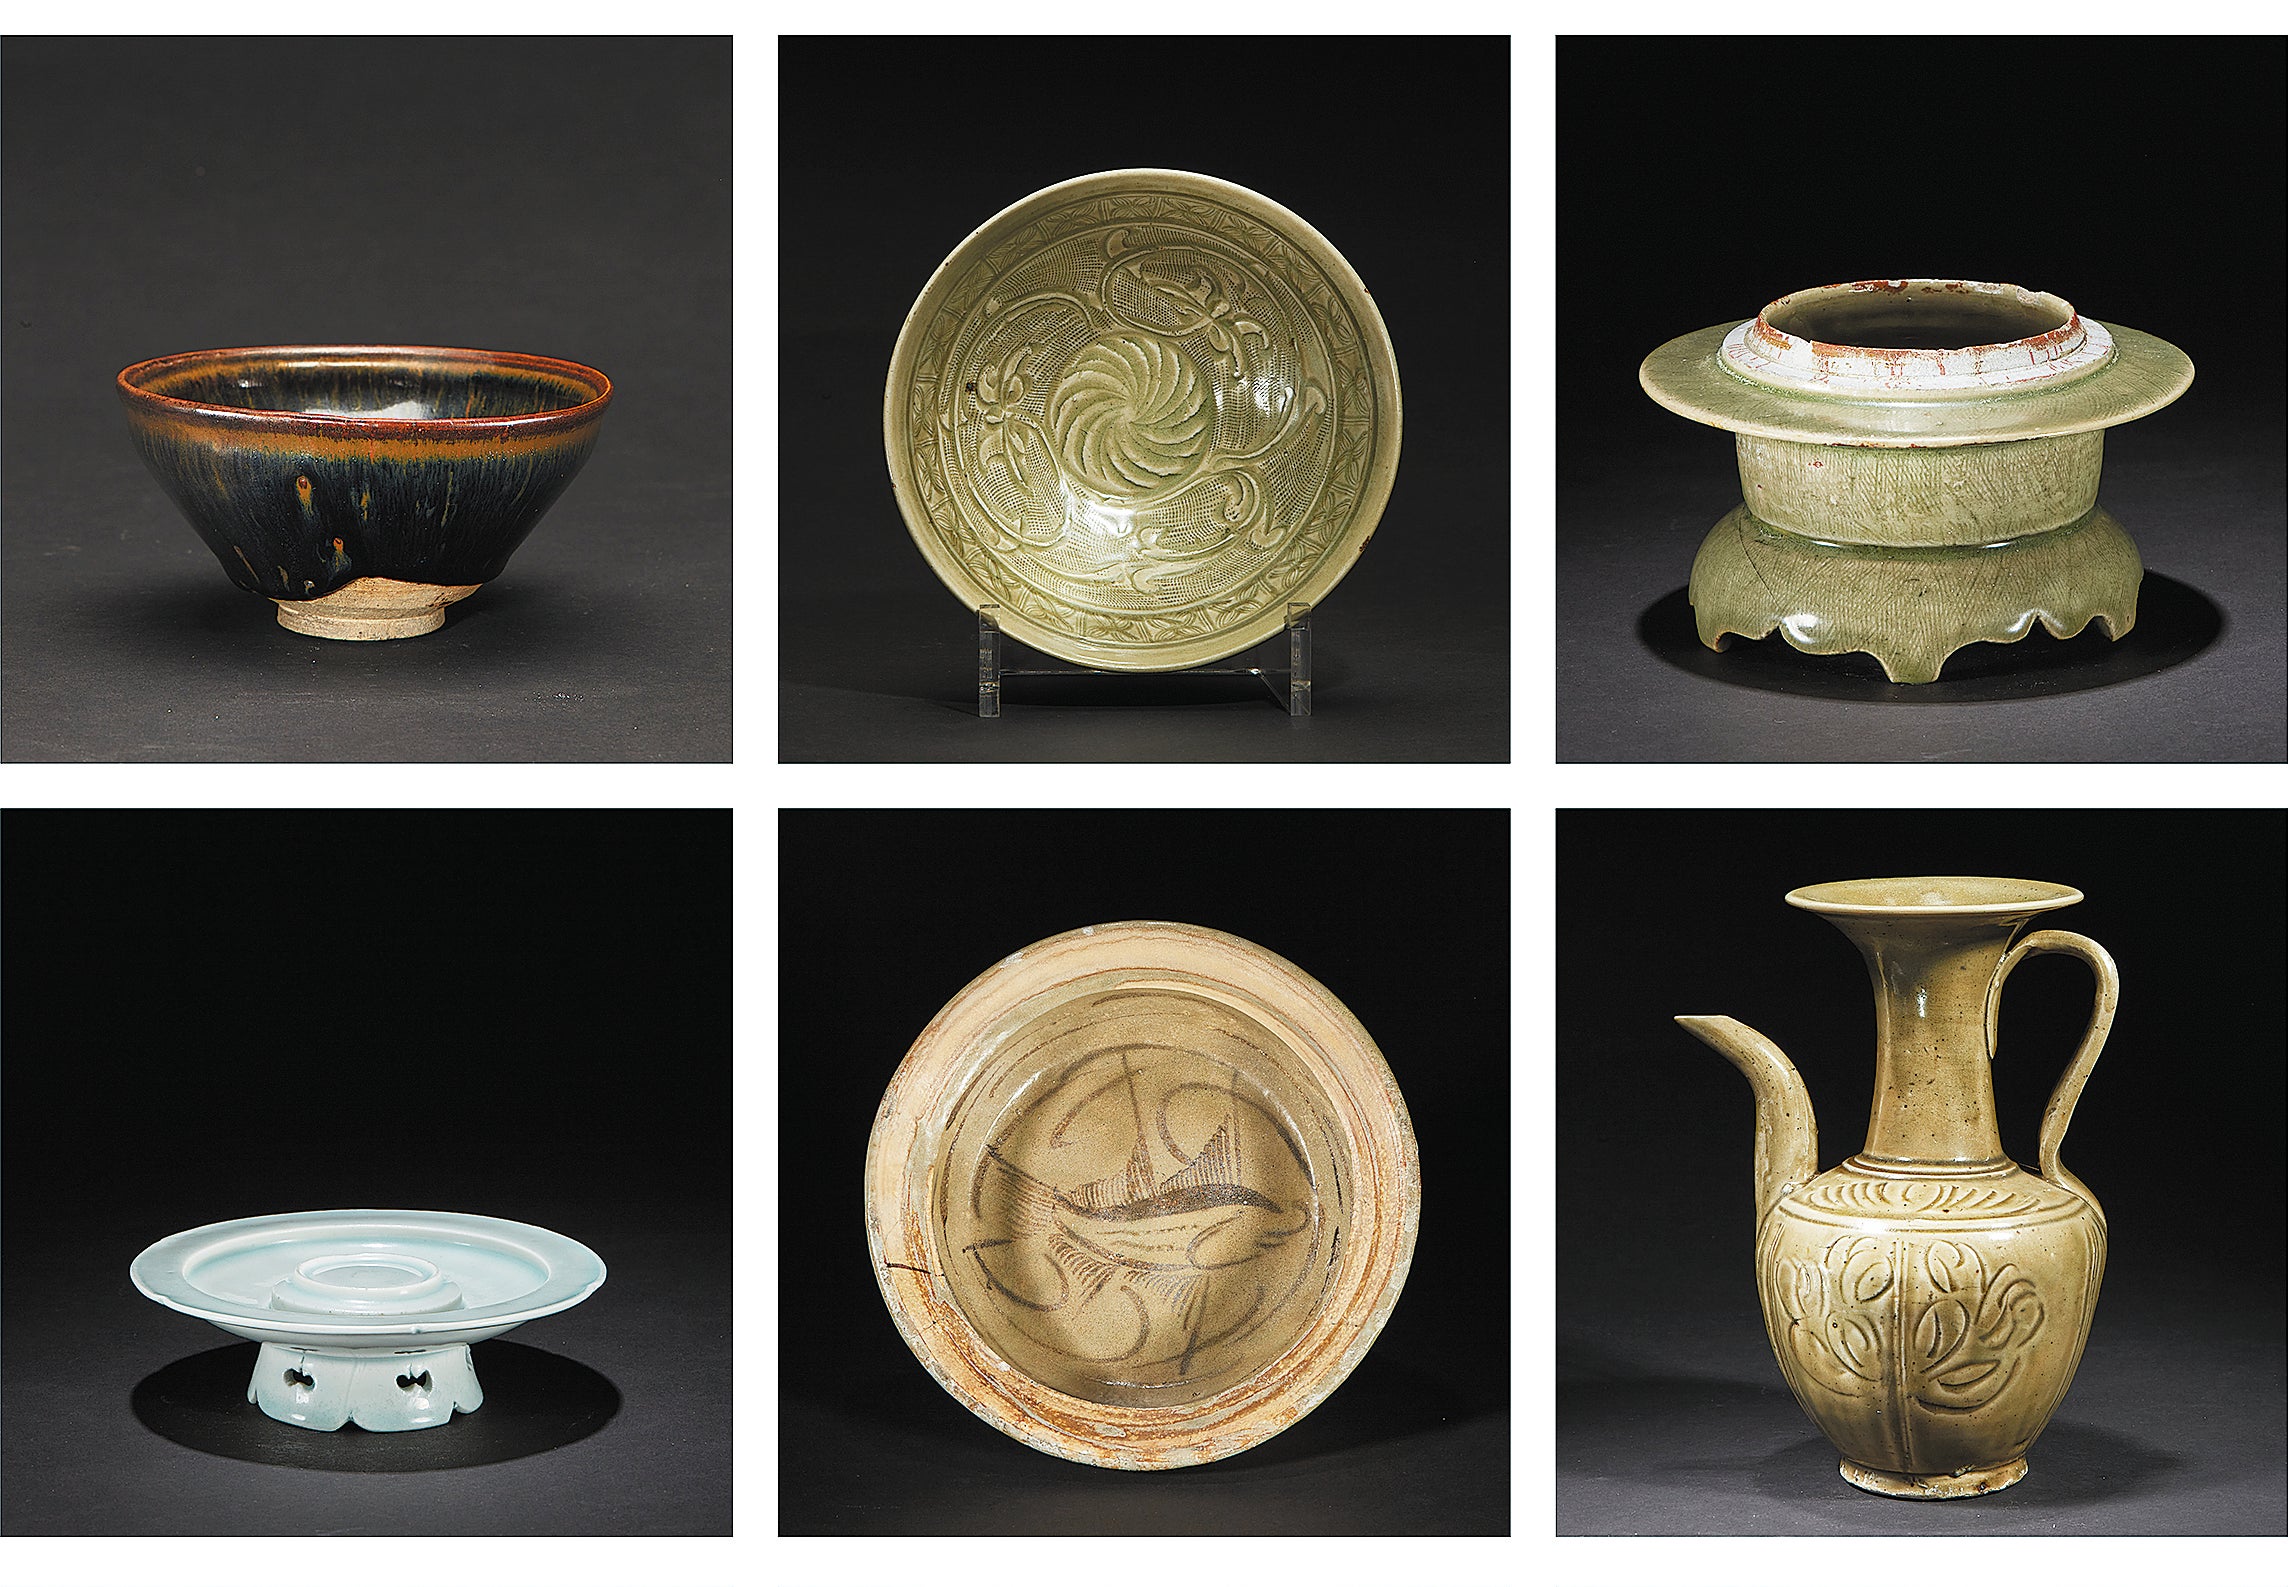 Artefacts unearthed from the Shuomen site include porcelain and lacquerware items